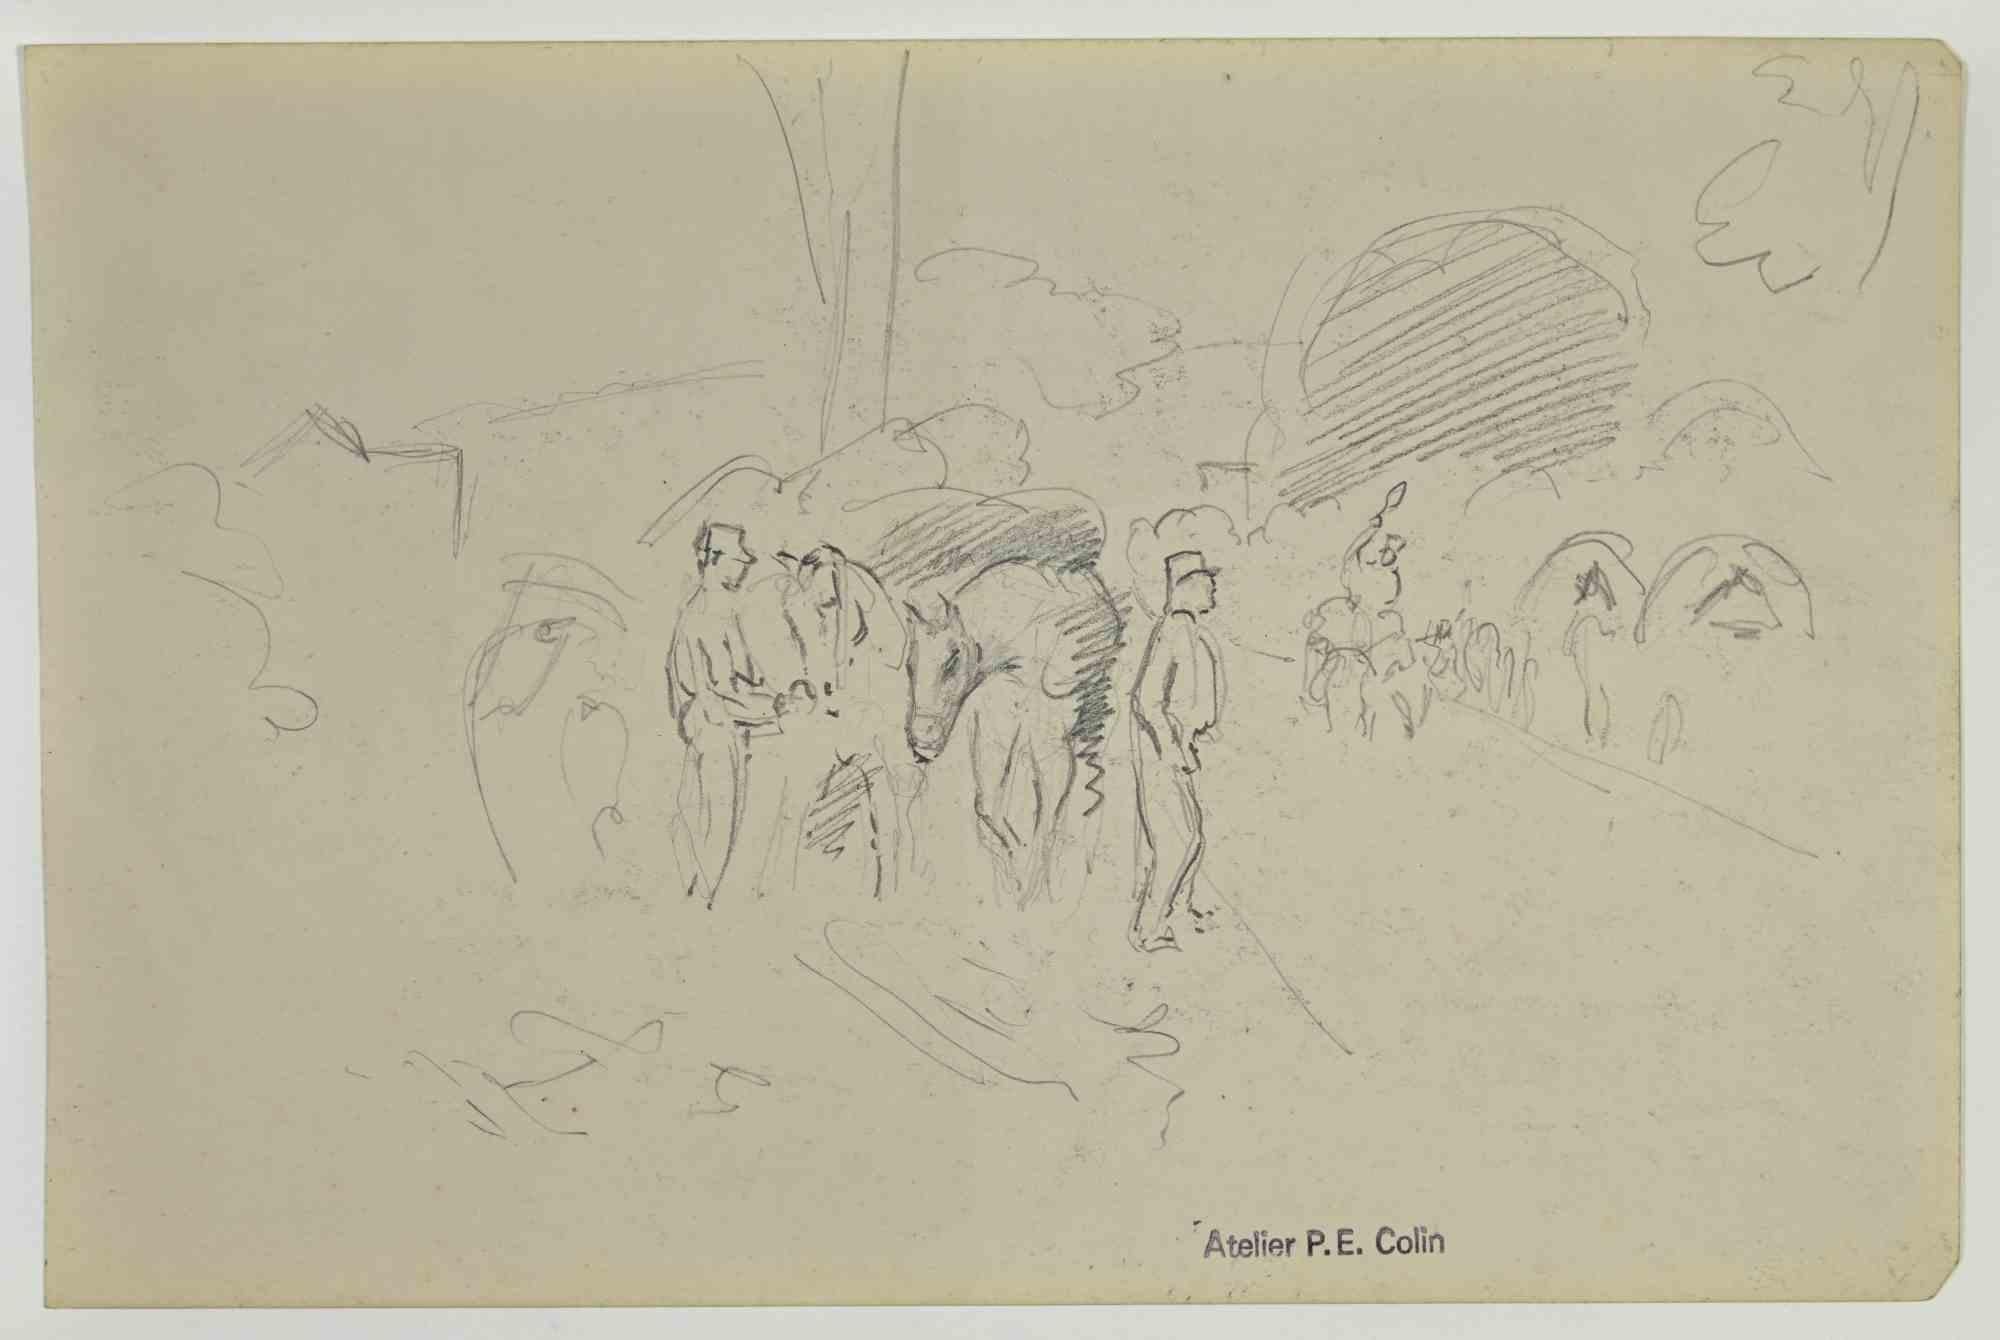 Soldiers  in the Campsite is an original drawing realized by Paul Emile Colin in the Early 20th Century.

Carbon Pencil on ivory-colored paper

Stamped on the lower.

Good conditions with slight foxing.

The artwork is realized through deft